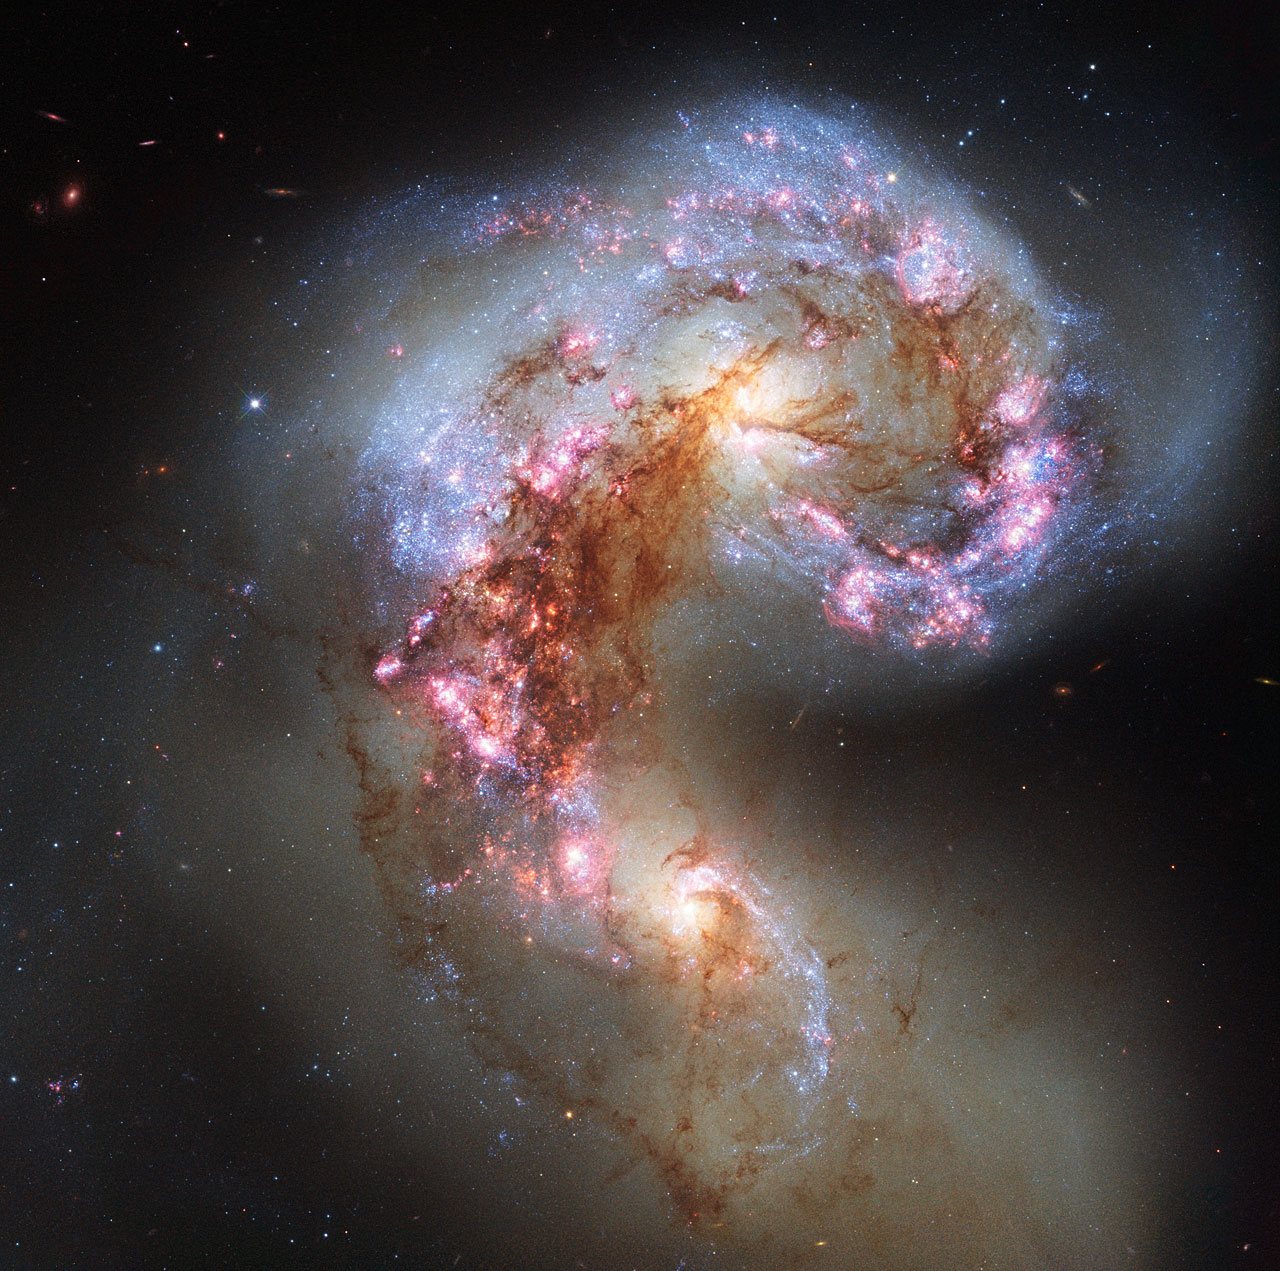 The rate of star formation is so high that the Antennae Galaxies are said to be in a state of starburst, a period in which all of the gas within the galaxies is being used to form stars.  Clouds of gas are seen in bright pink and red, surrounding the bright flashes of blue star-forming regions.